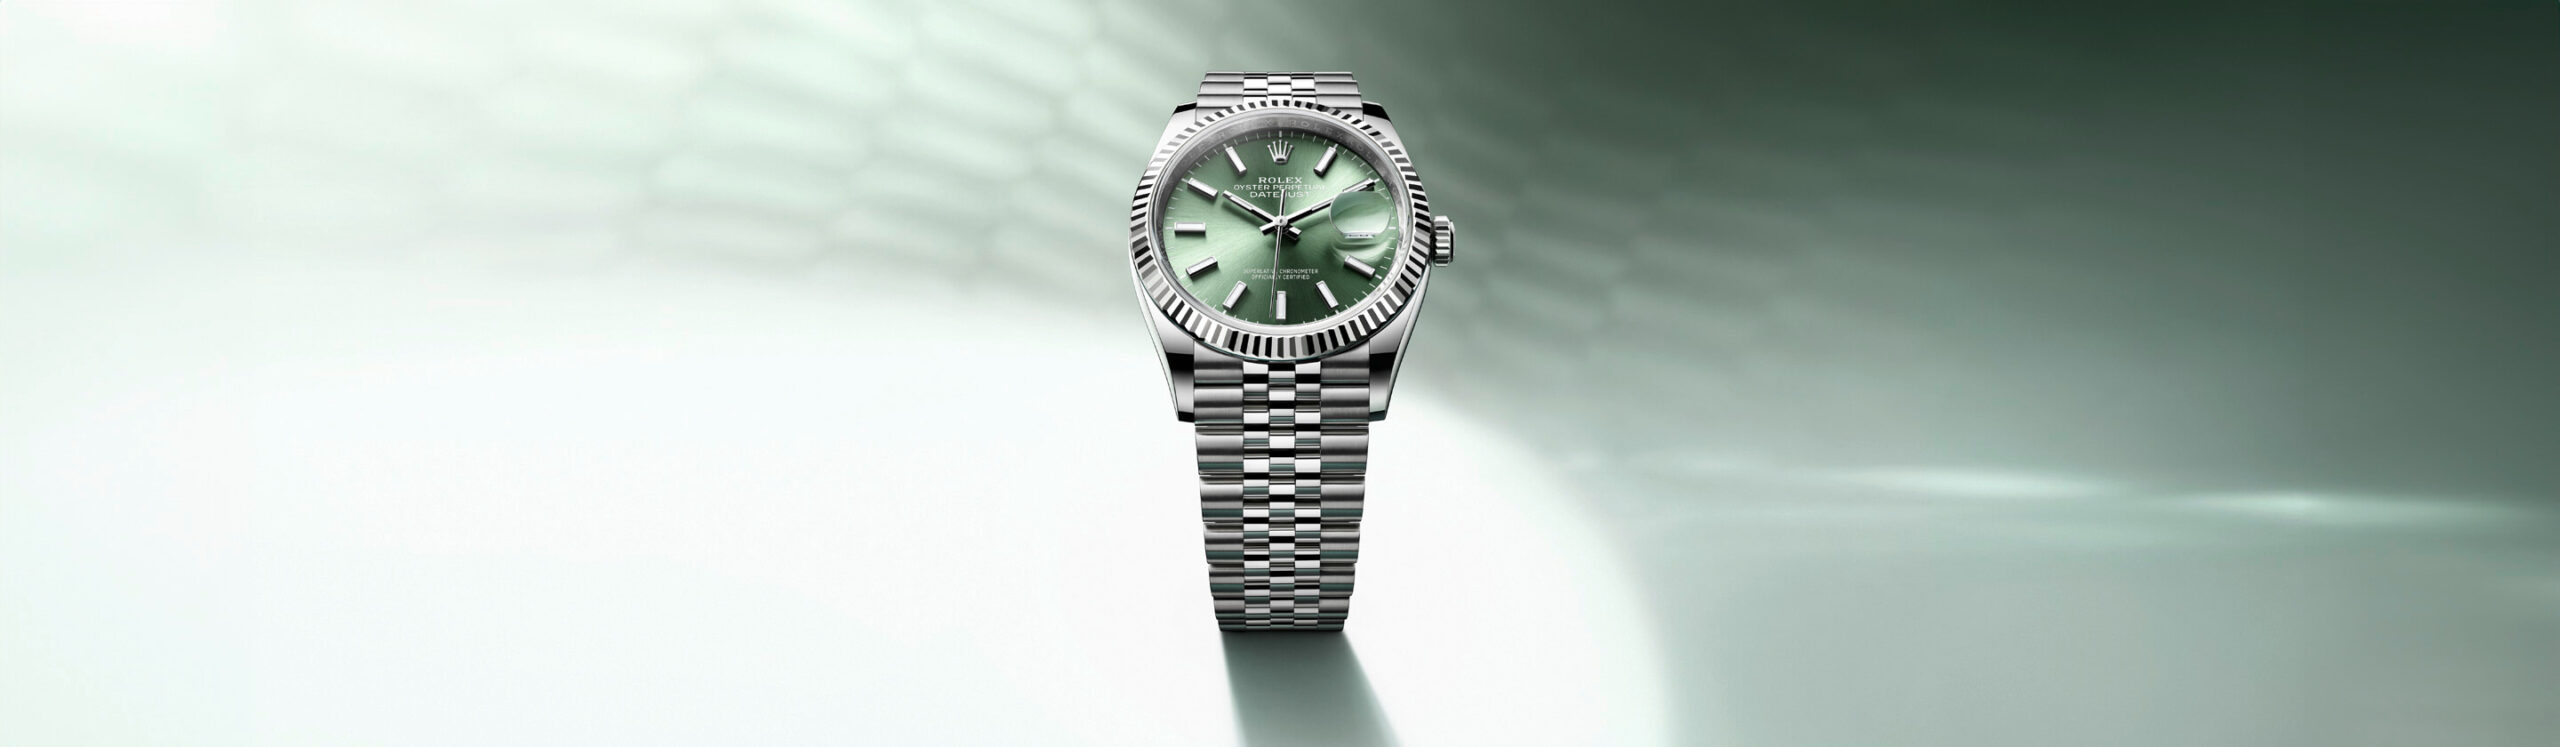 rolex datejust watches - global watch company